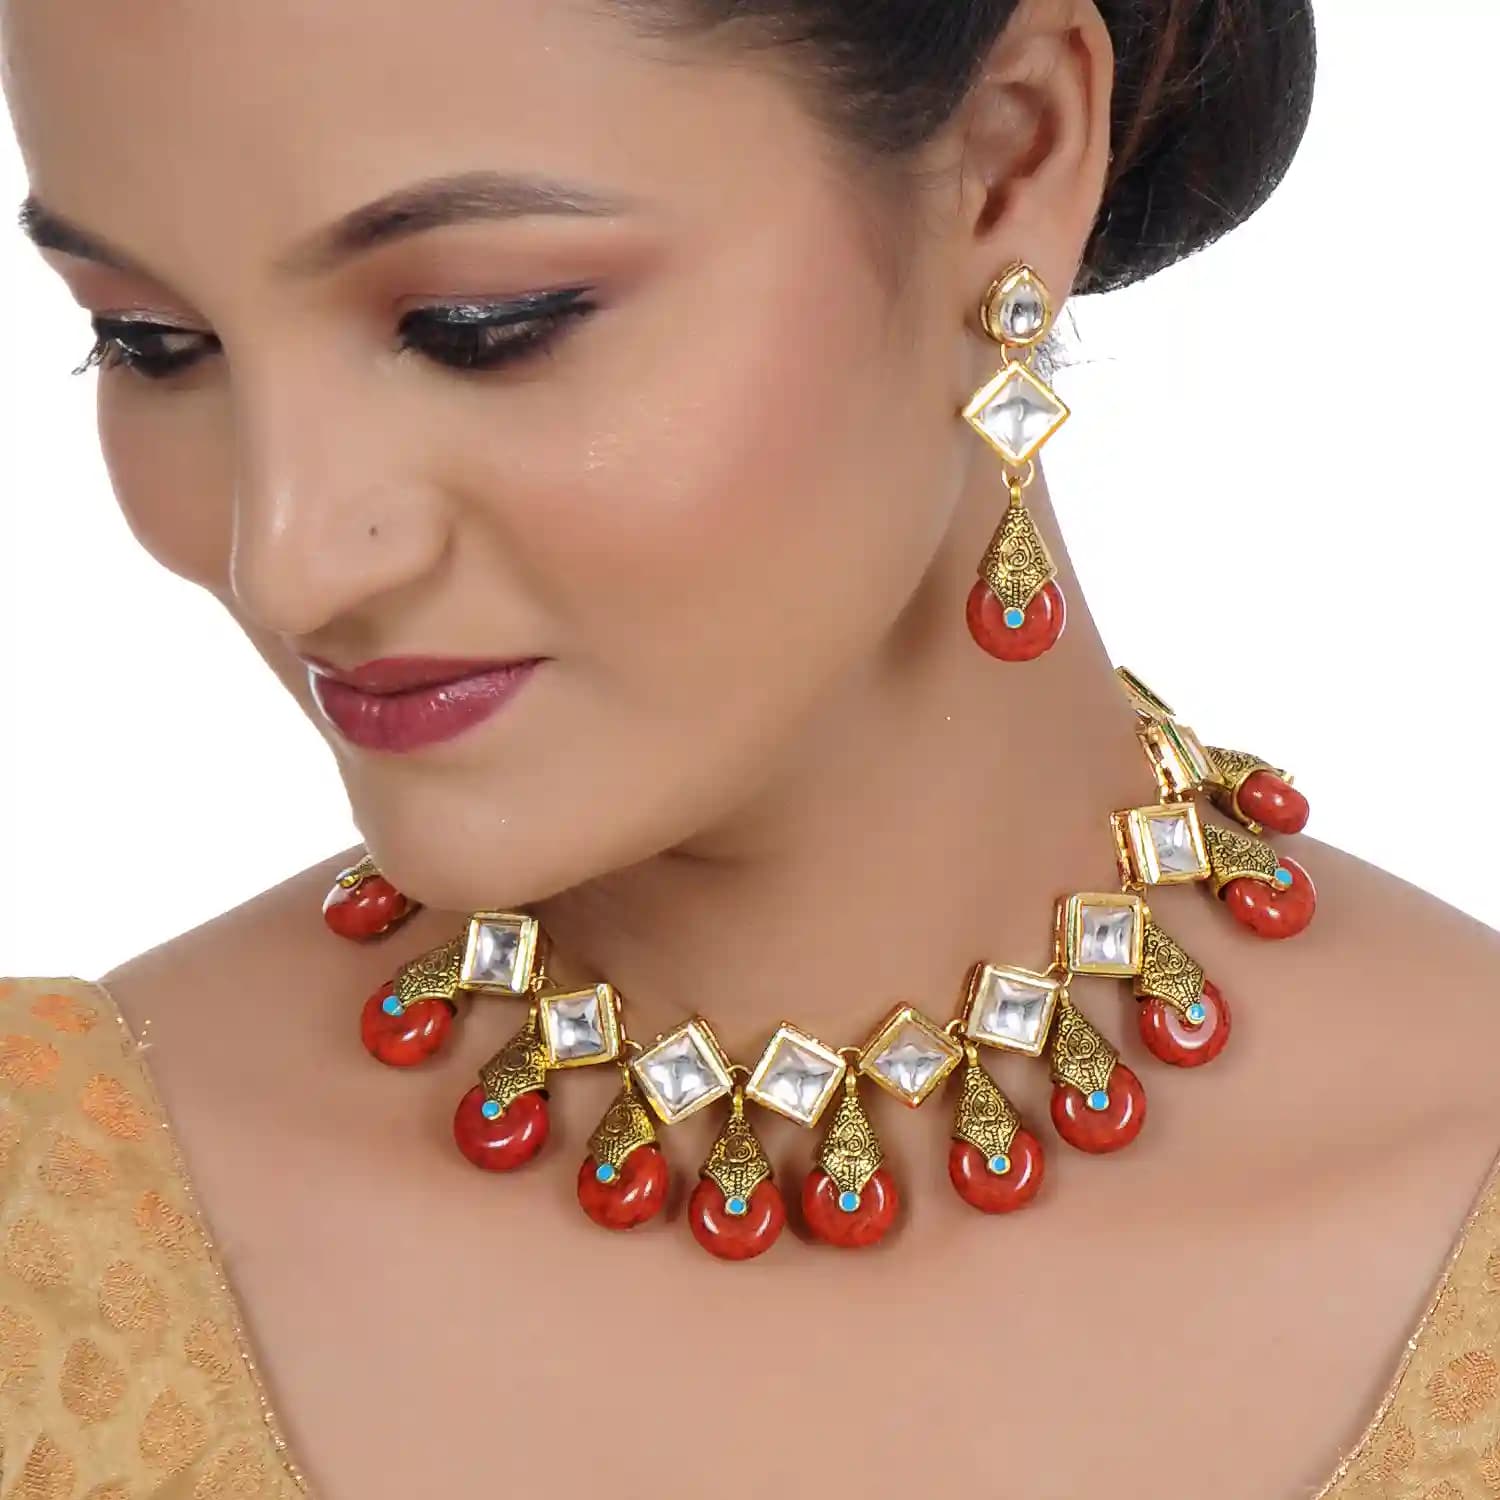 Gold Plated(18k) Big Square Stone Necklace With Earrings - Red